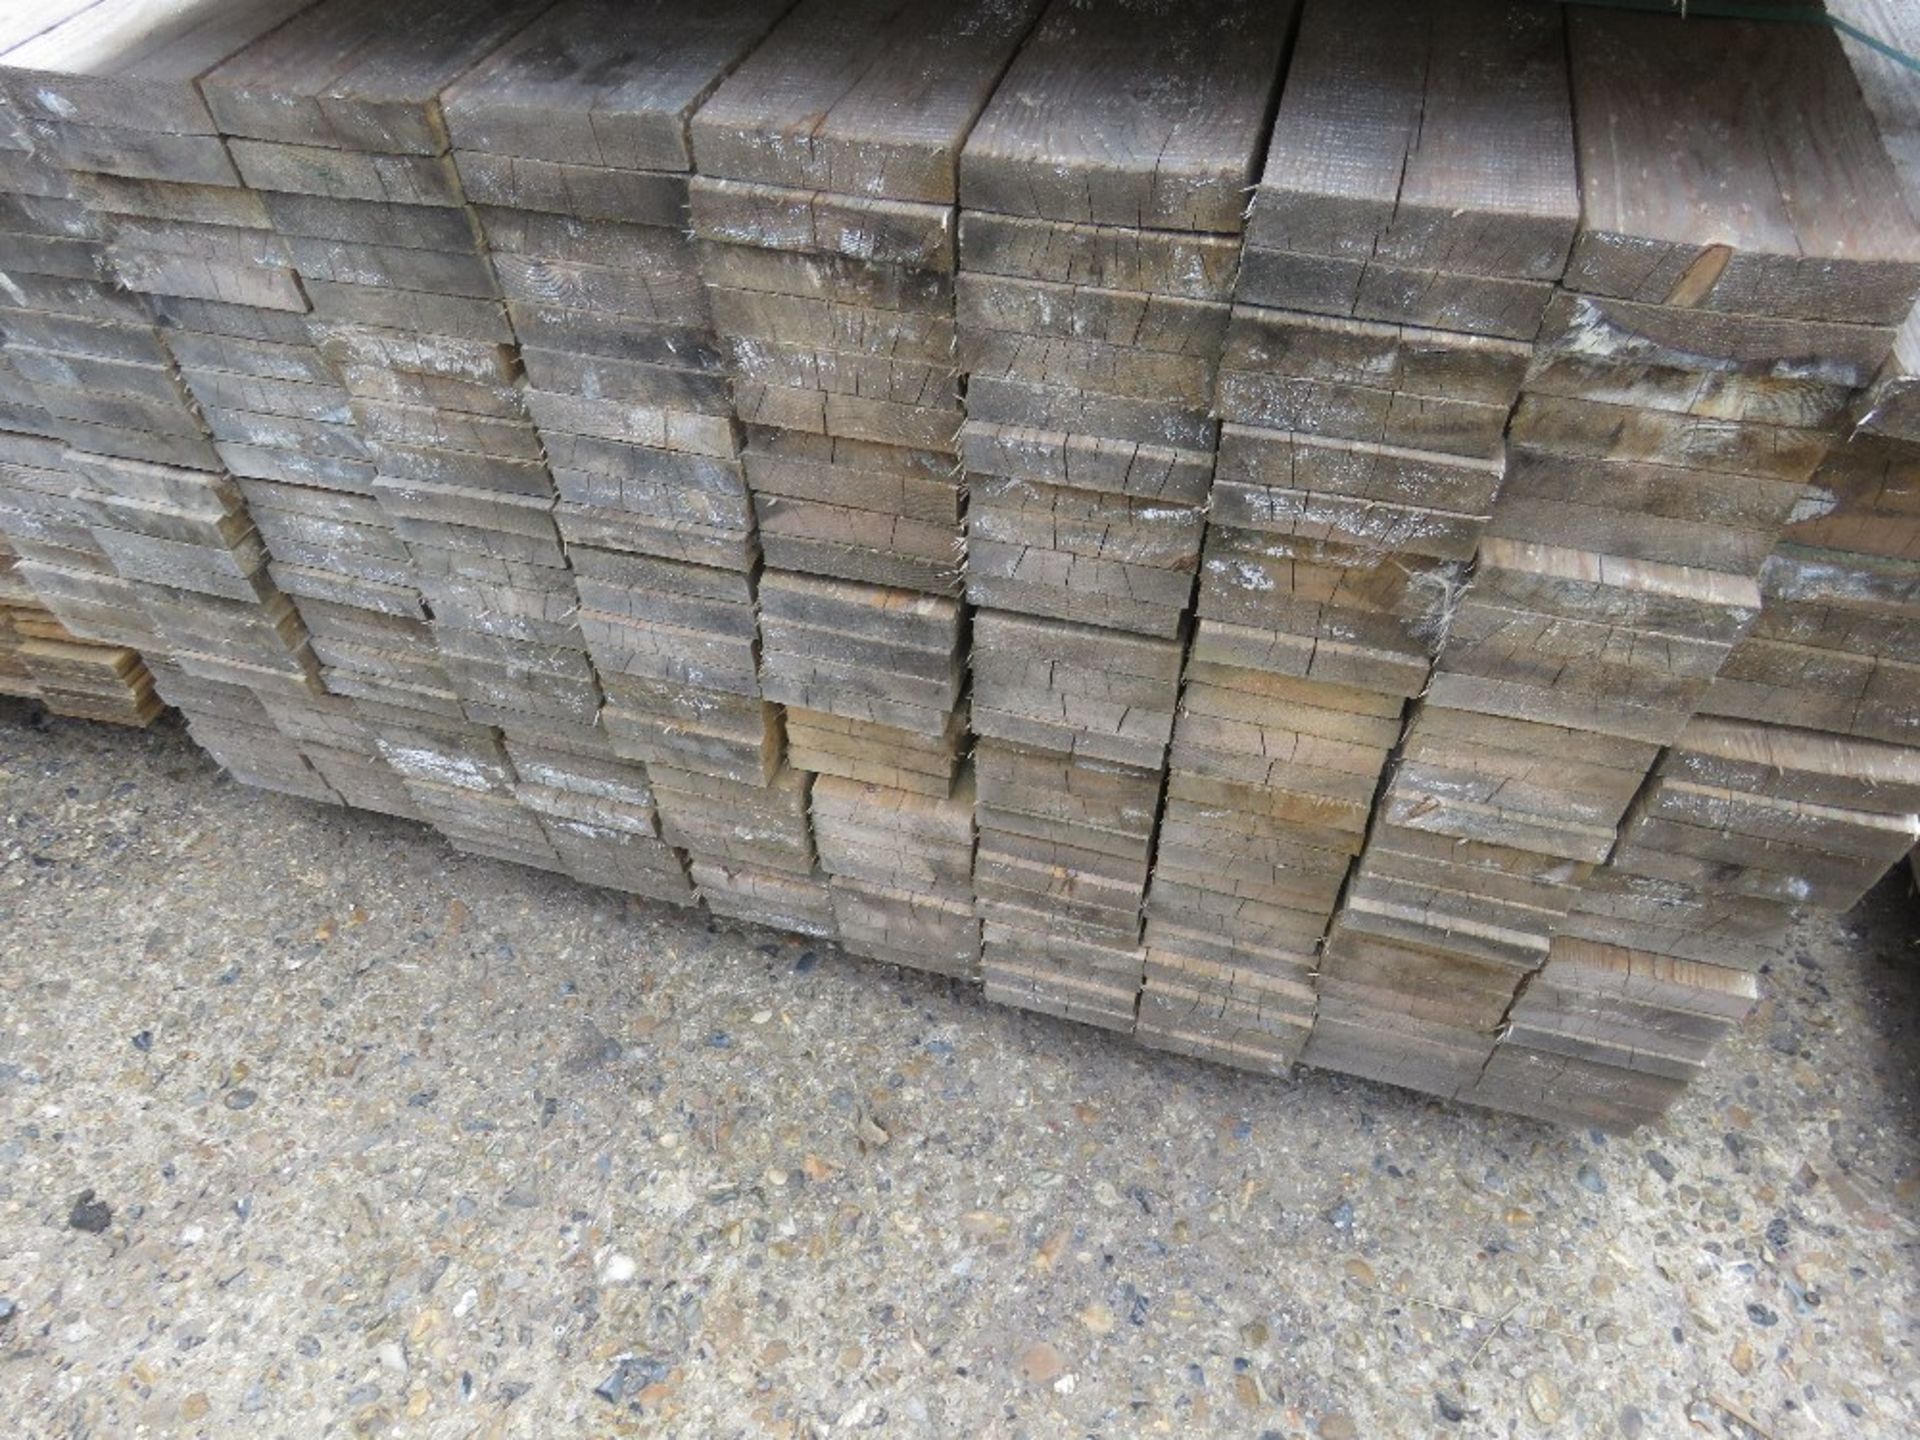 LARGE PACK OF UNTREATED FENCE CLADDING TIMBER BOARDS, 1.83M LENGTH X 10CM WIDTH X 2CM DEPTH APPROX. - Image 2 of 3